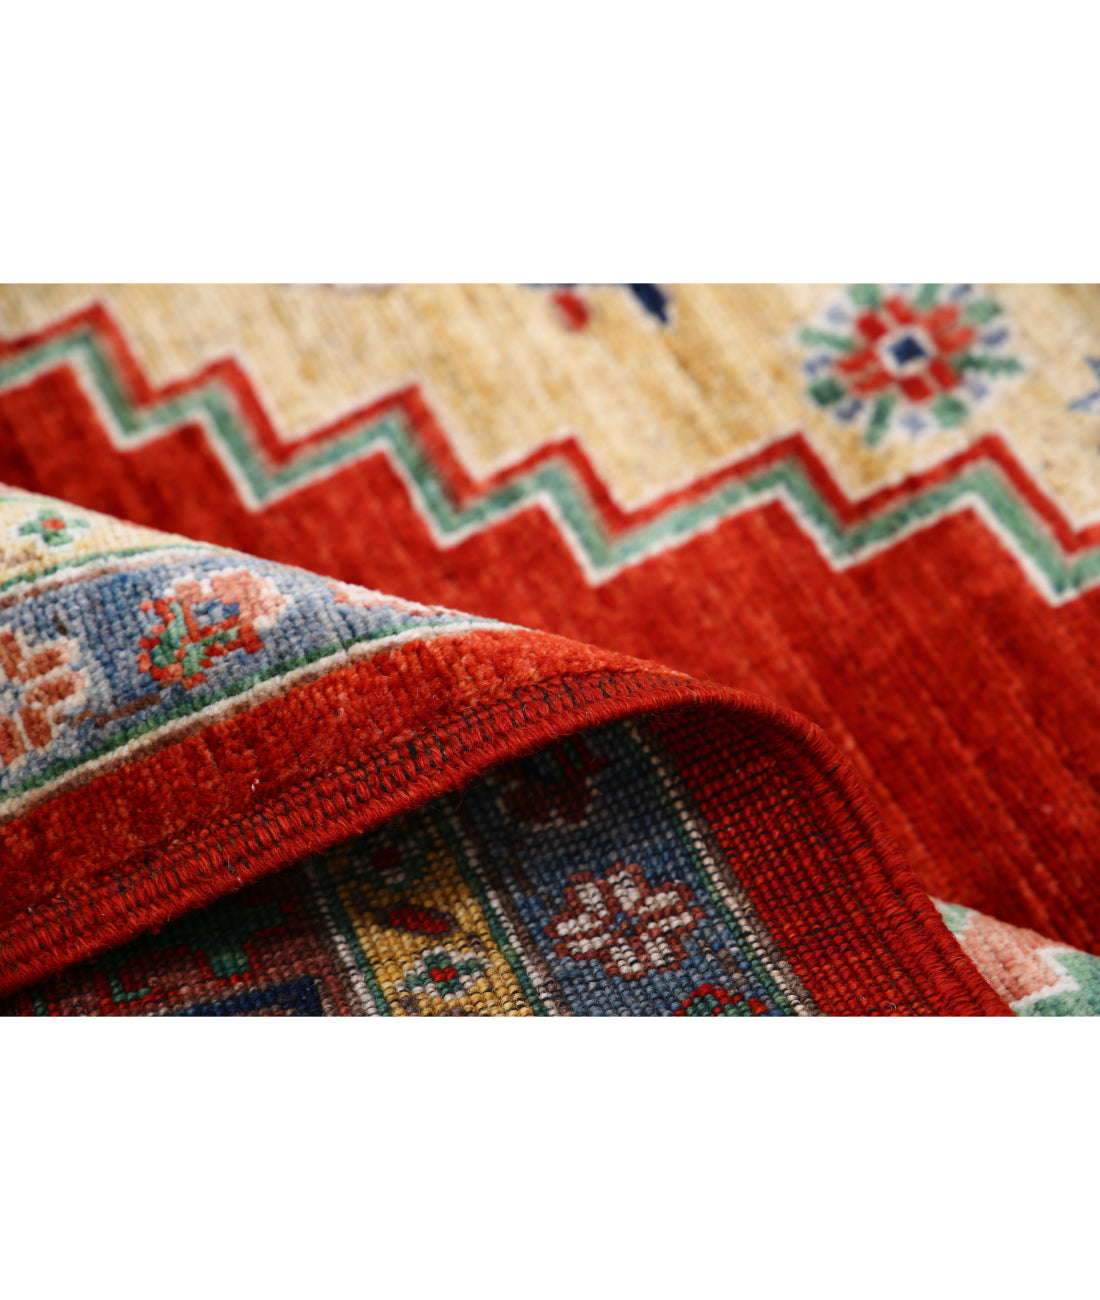 Heriz 9'0'' X 11'8'' Hand-Knotted Wool Rug 9'0'' x 11'8'' (270 X 350) / Red / Blue